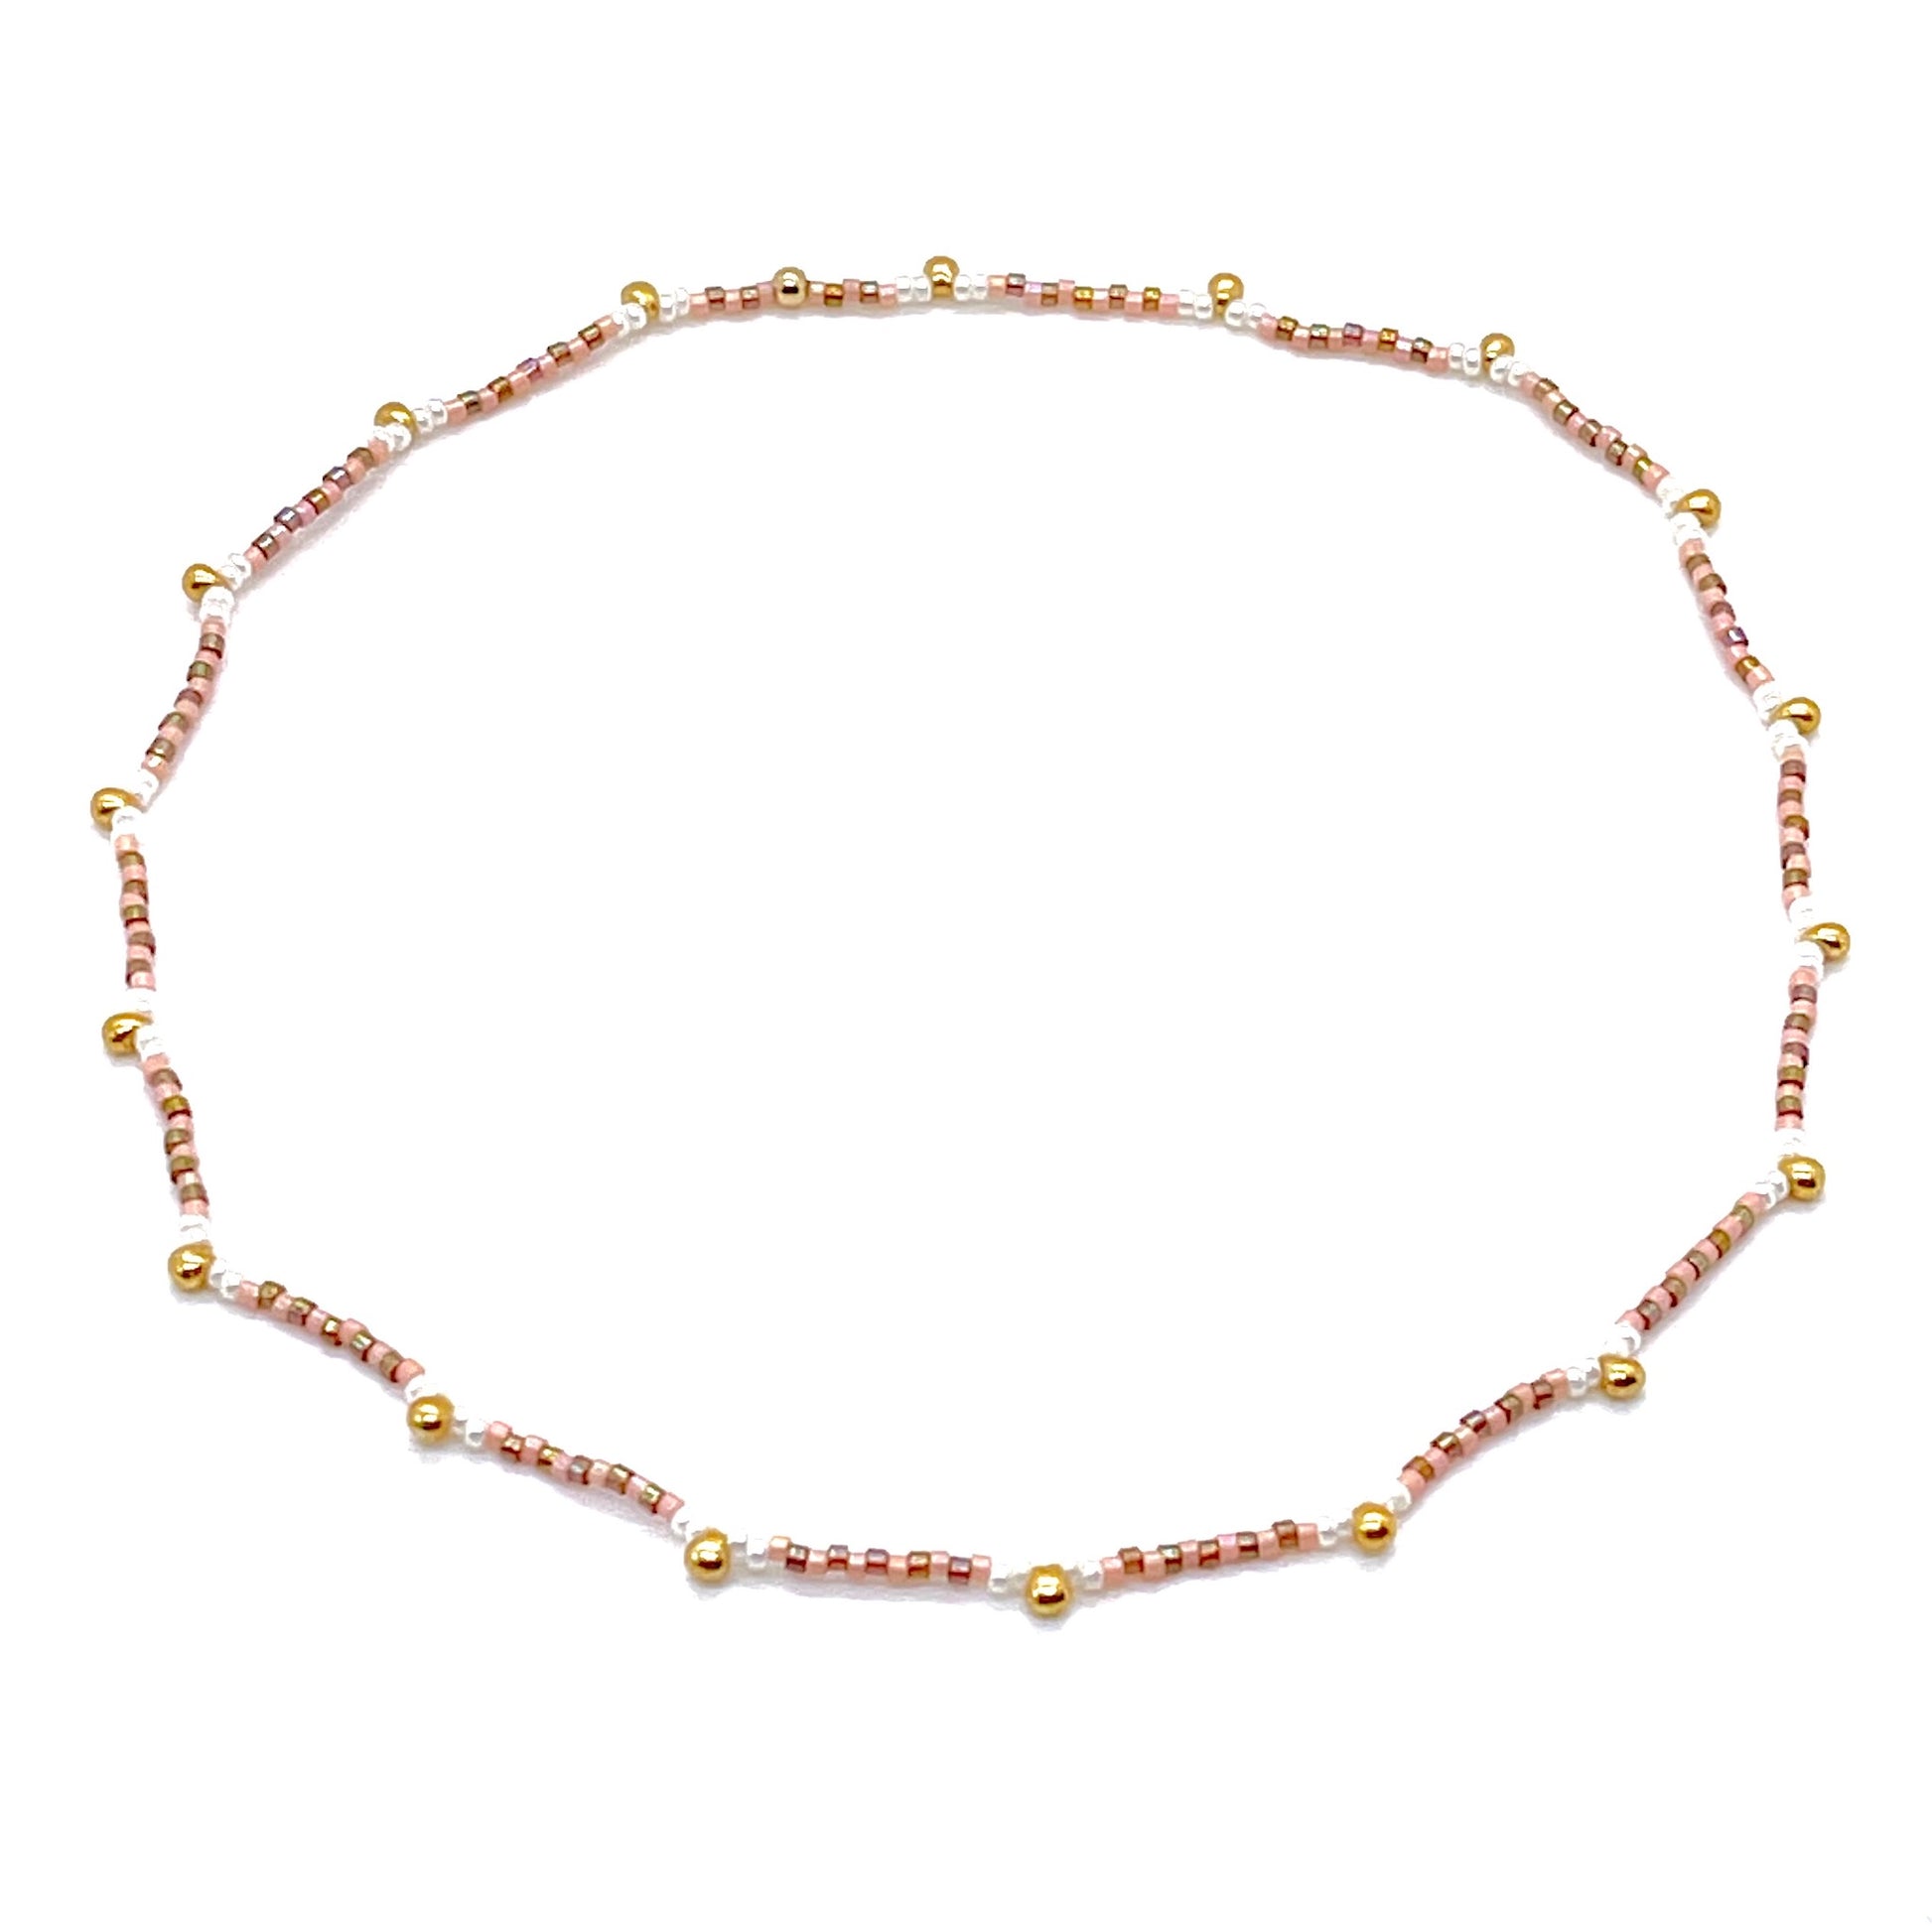 Seed bead choker necklace with peach, topaz, and pearl seed beads and gold-tone droplets. Beaded on elastic stretch.